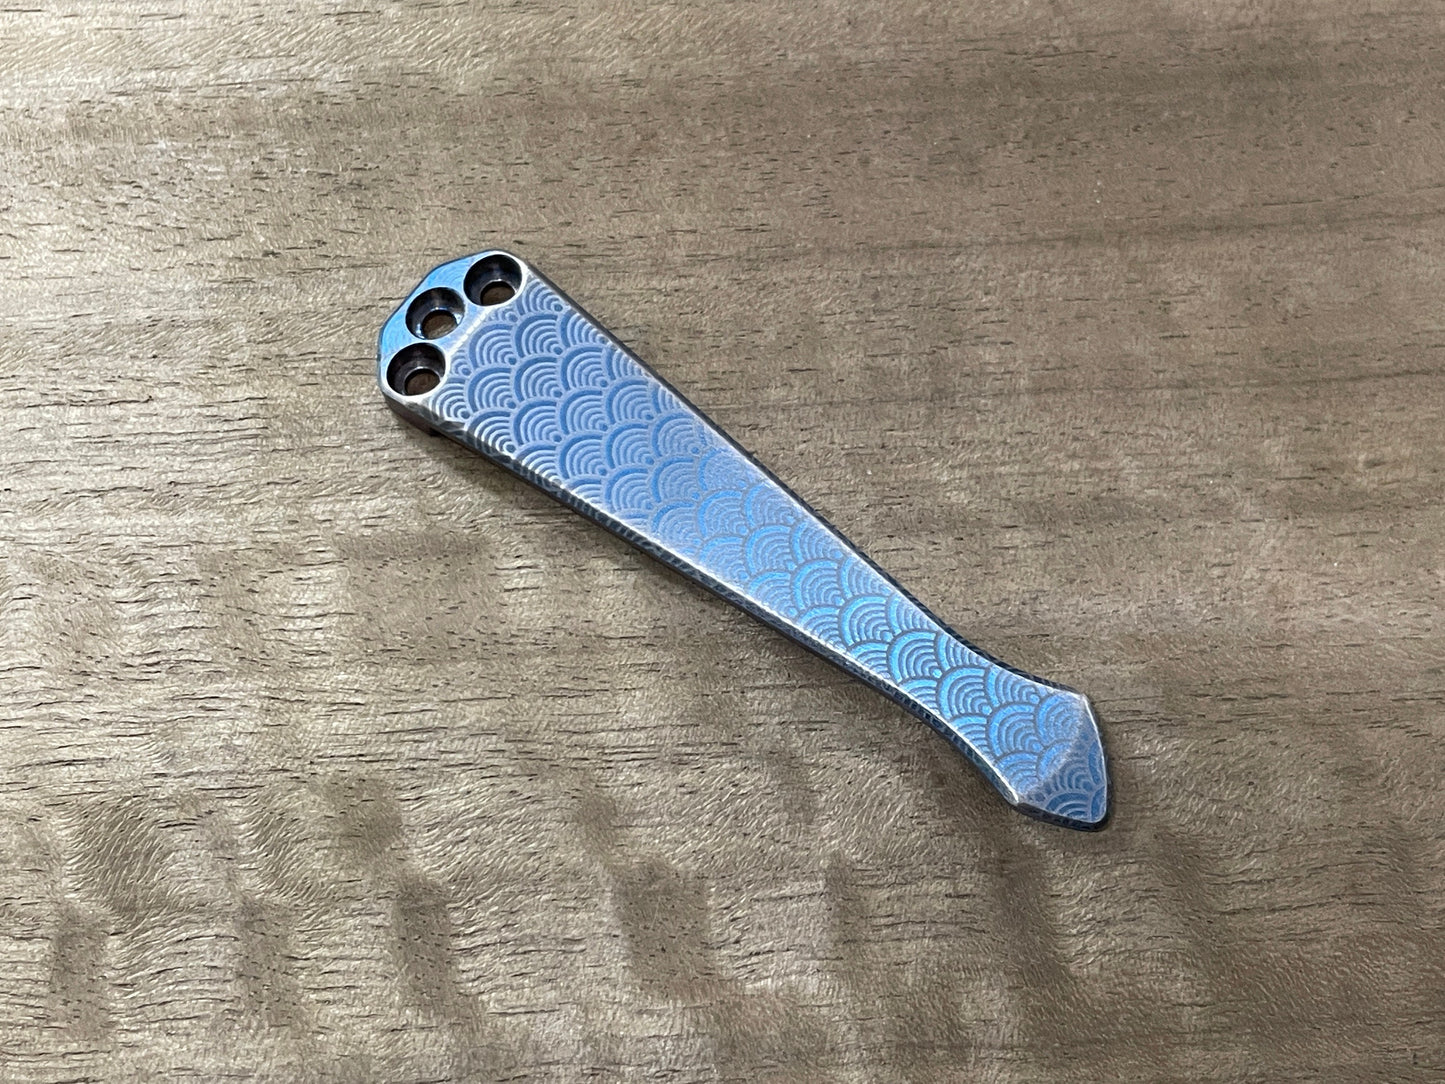 Blue ano SEIGAIHA engraved Brushed SPIDY Titanium CLIP for most Benchmade models